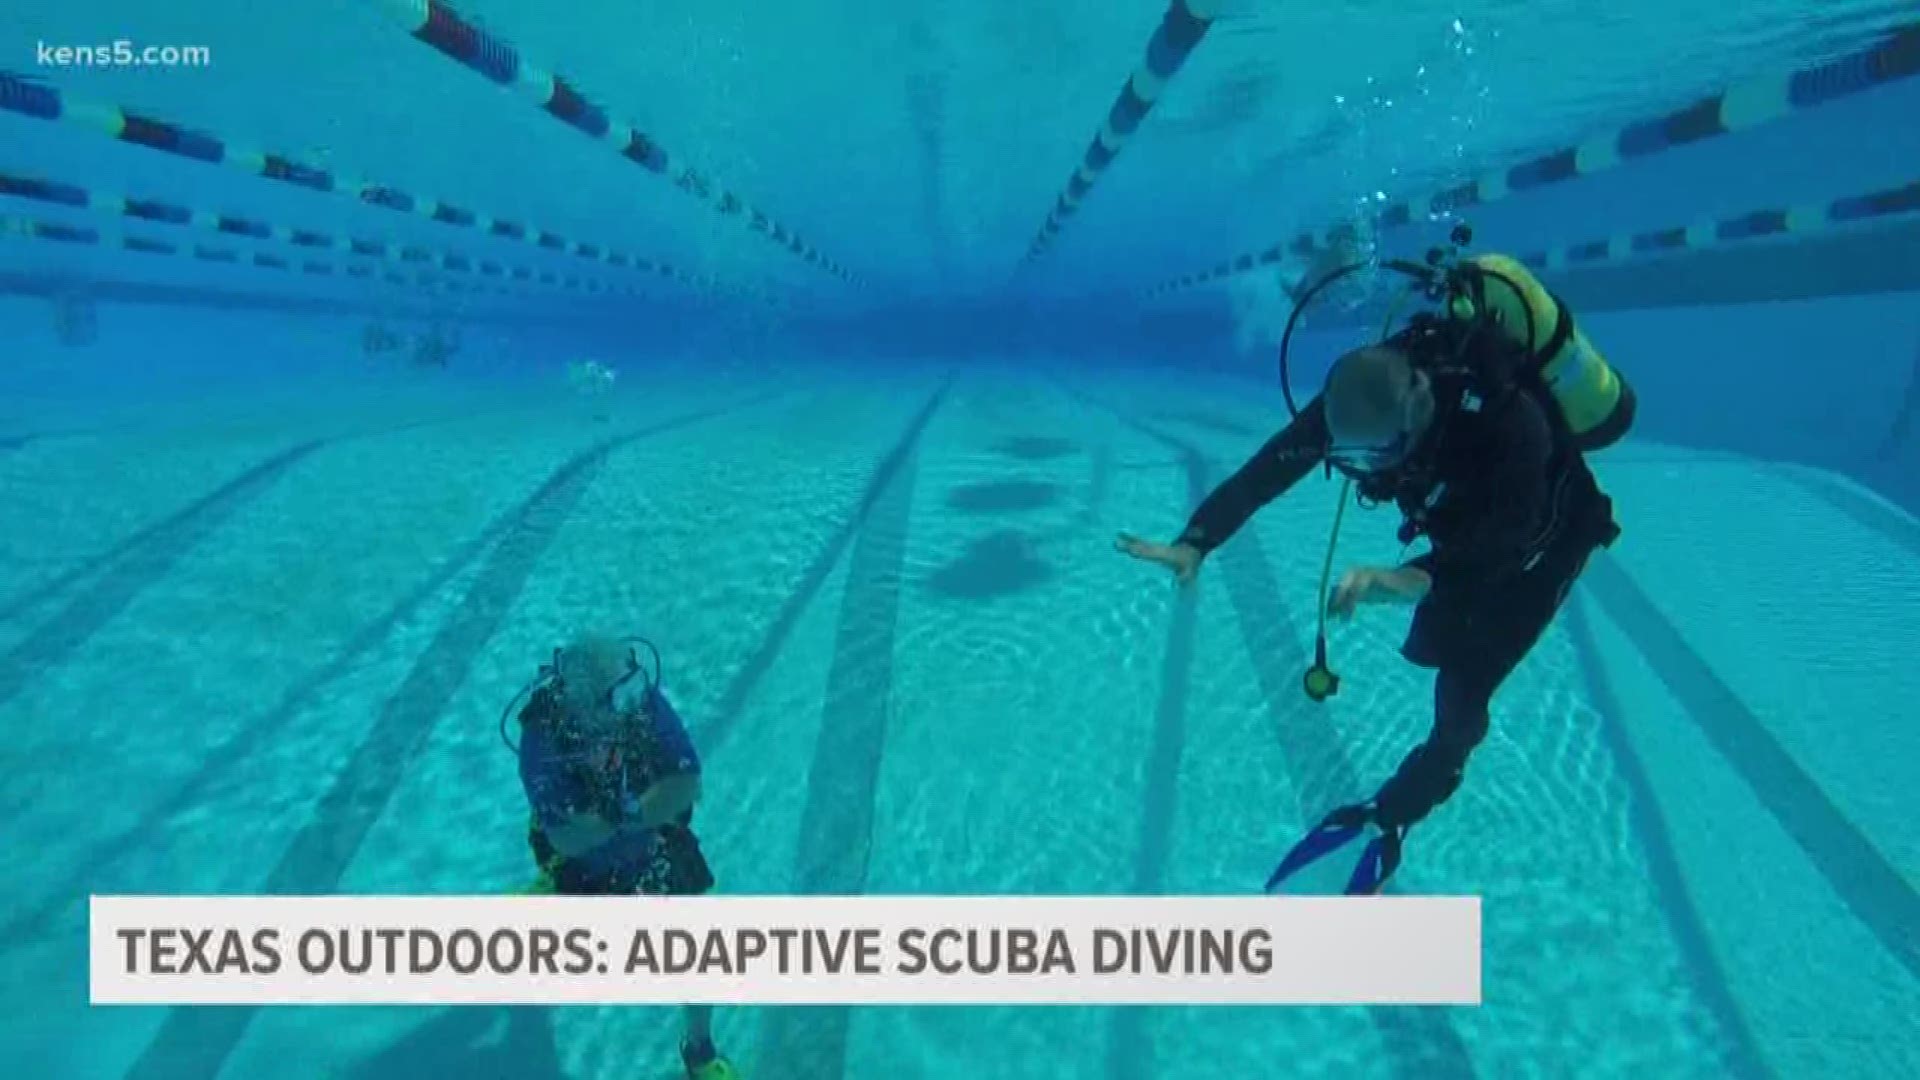 Scuba diving opens you up to a new world!